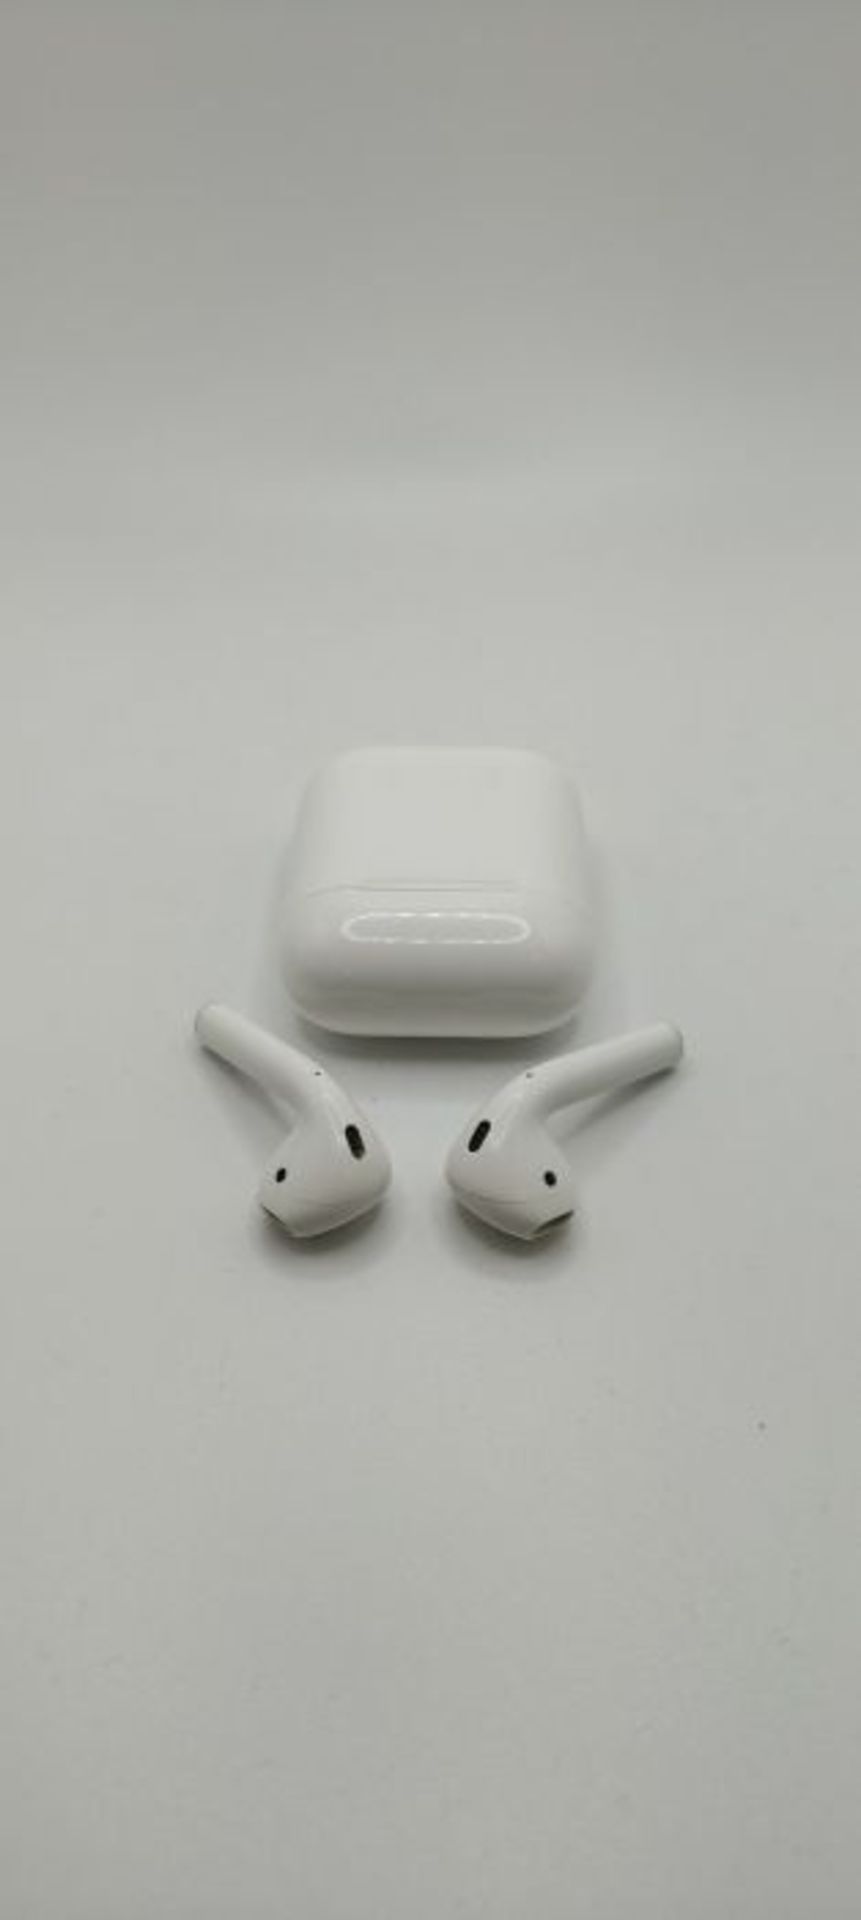 RRP £129.00 Apple AirPods avec bo?tier de Charge Filaire (2? g?n?ration) - Image 3 of 3